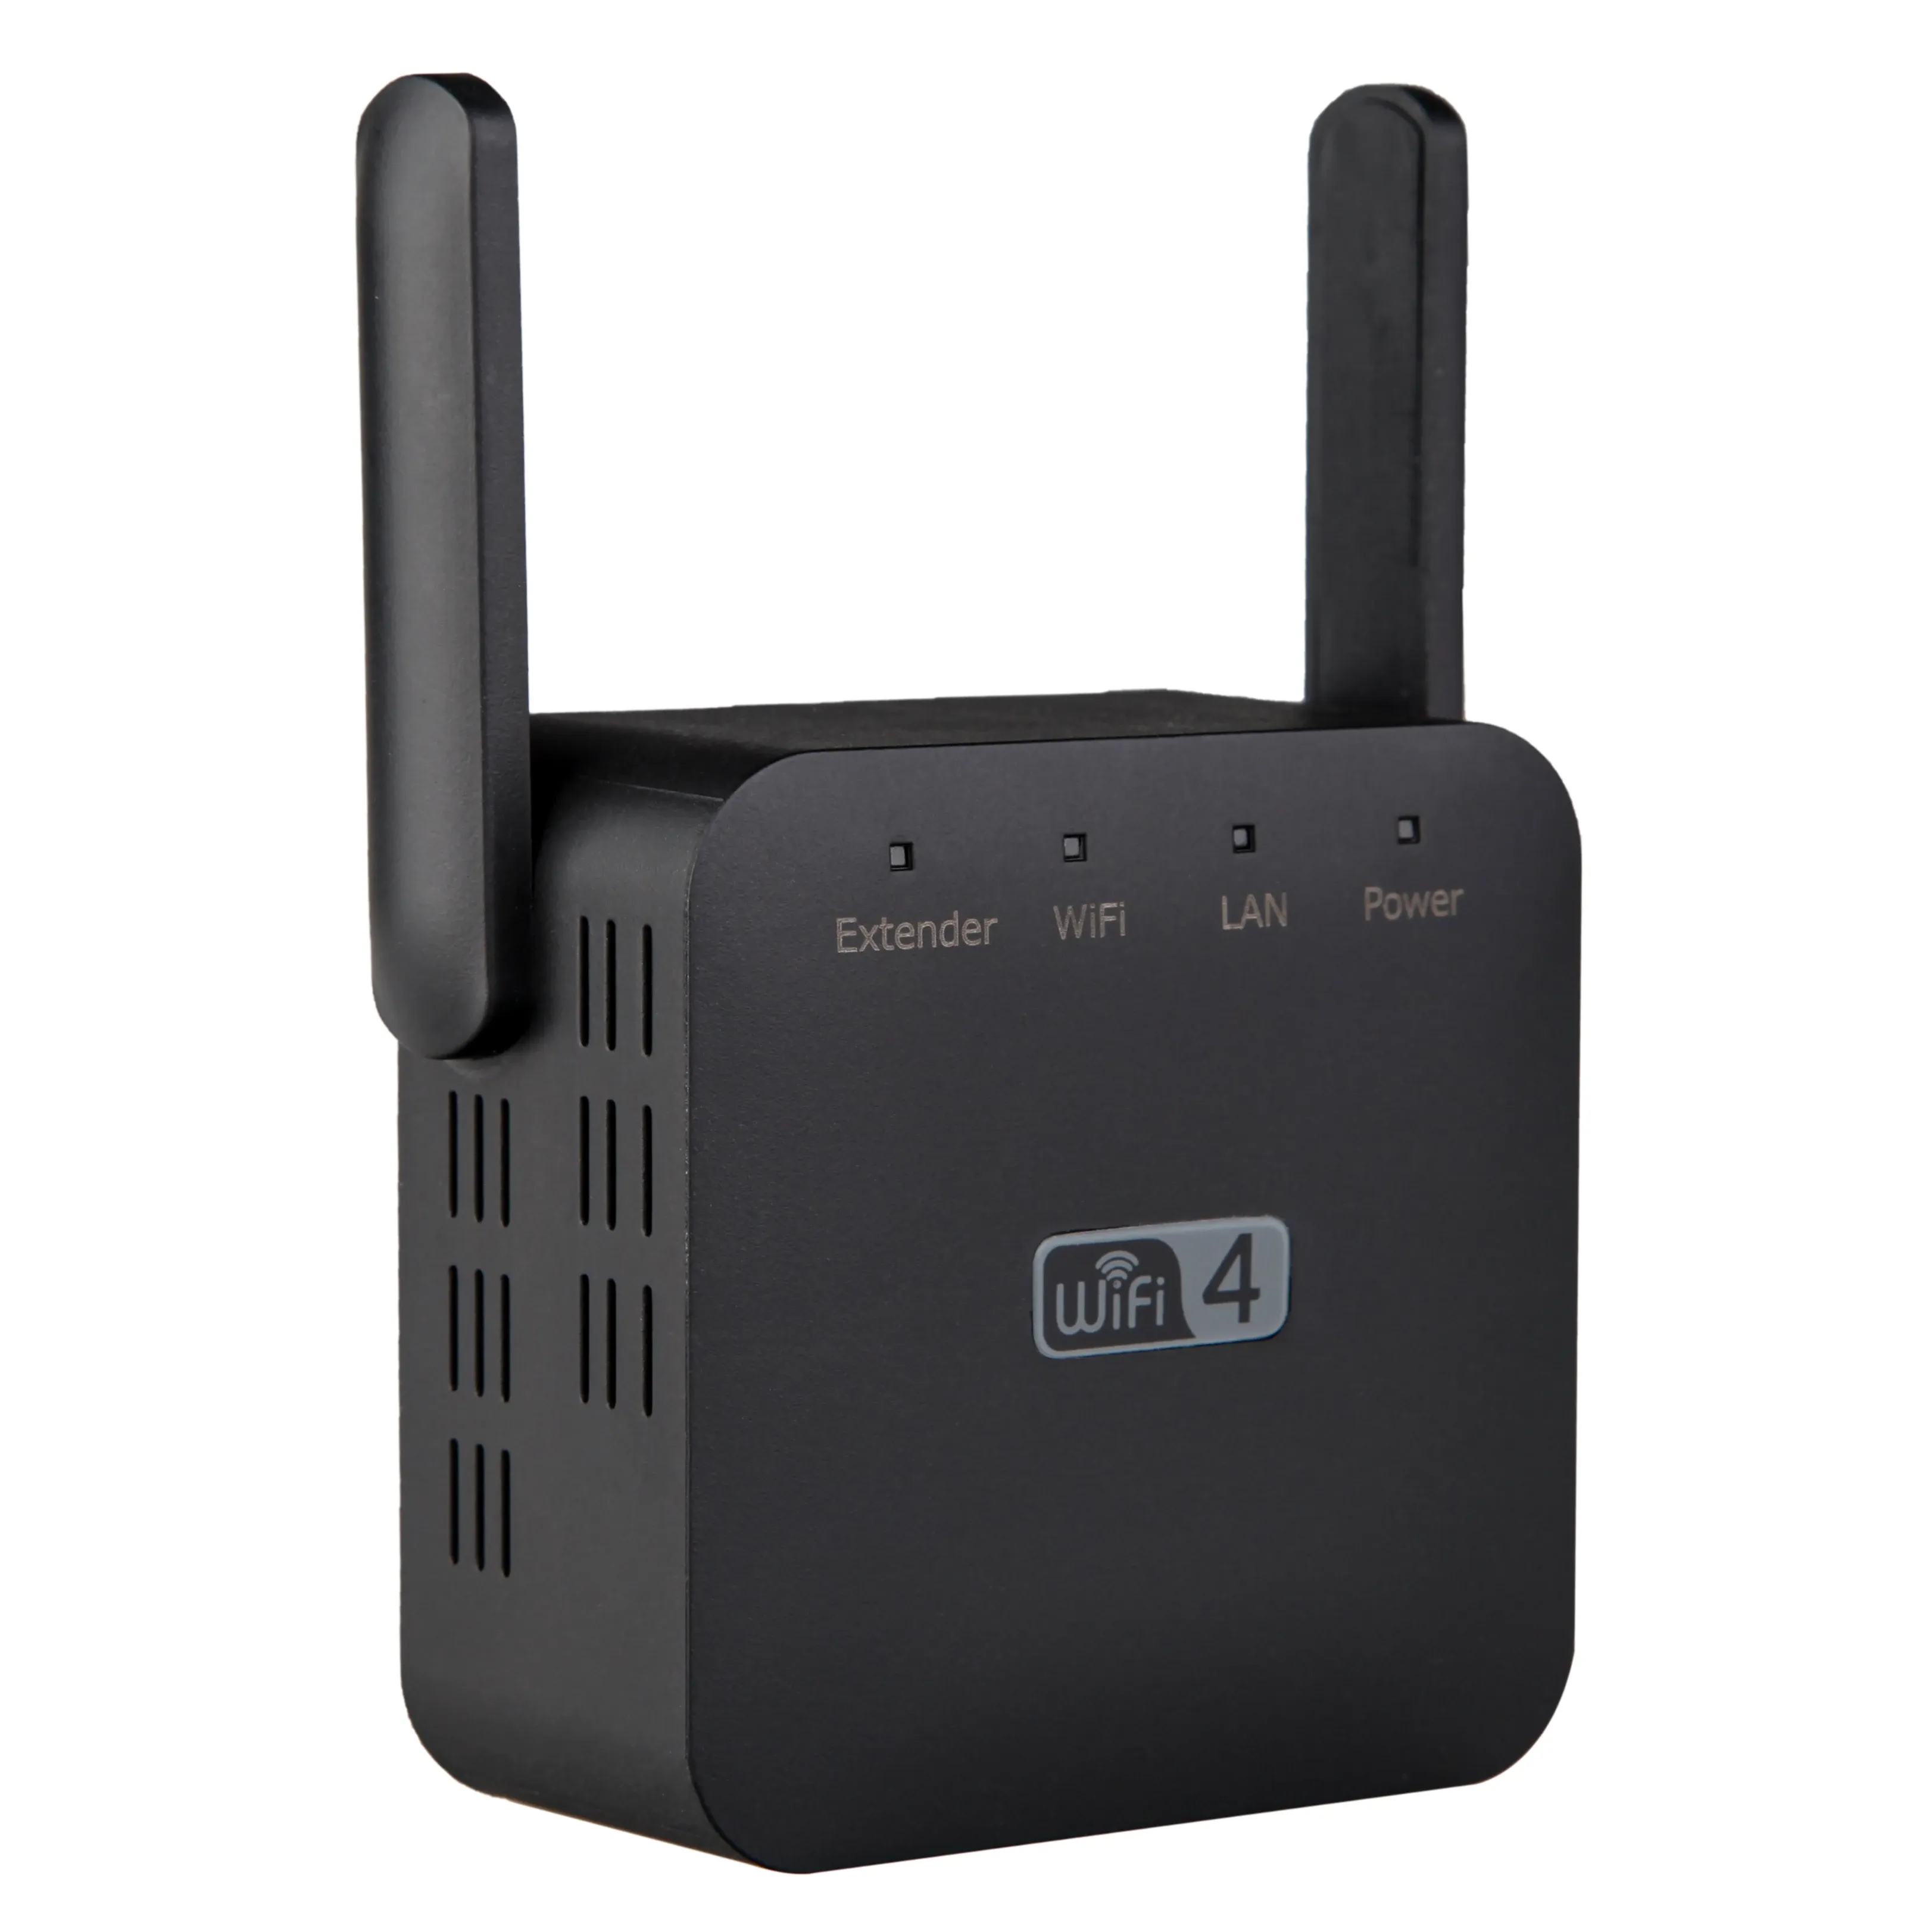 Router Wflyer WDR611U Router WiFi Extender Mini WiFi Repeater WiFi Booster Hochgeschwindigkeit Wireless Repeater 802.11n/b/g Zugangspunkt